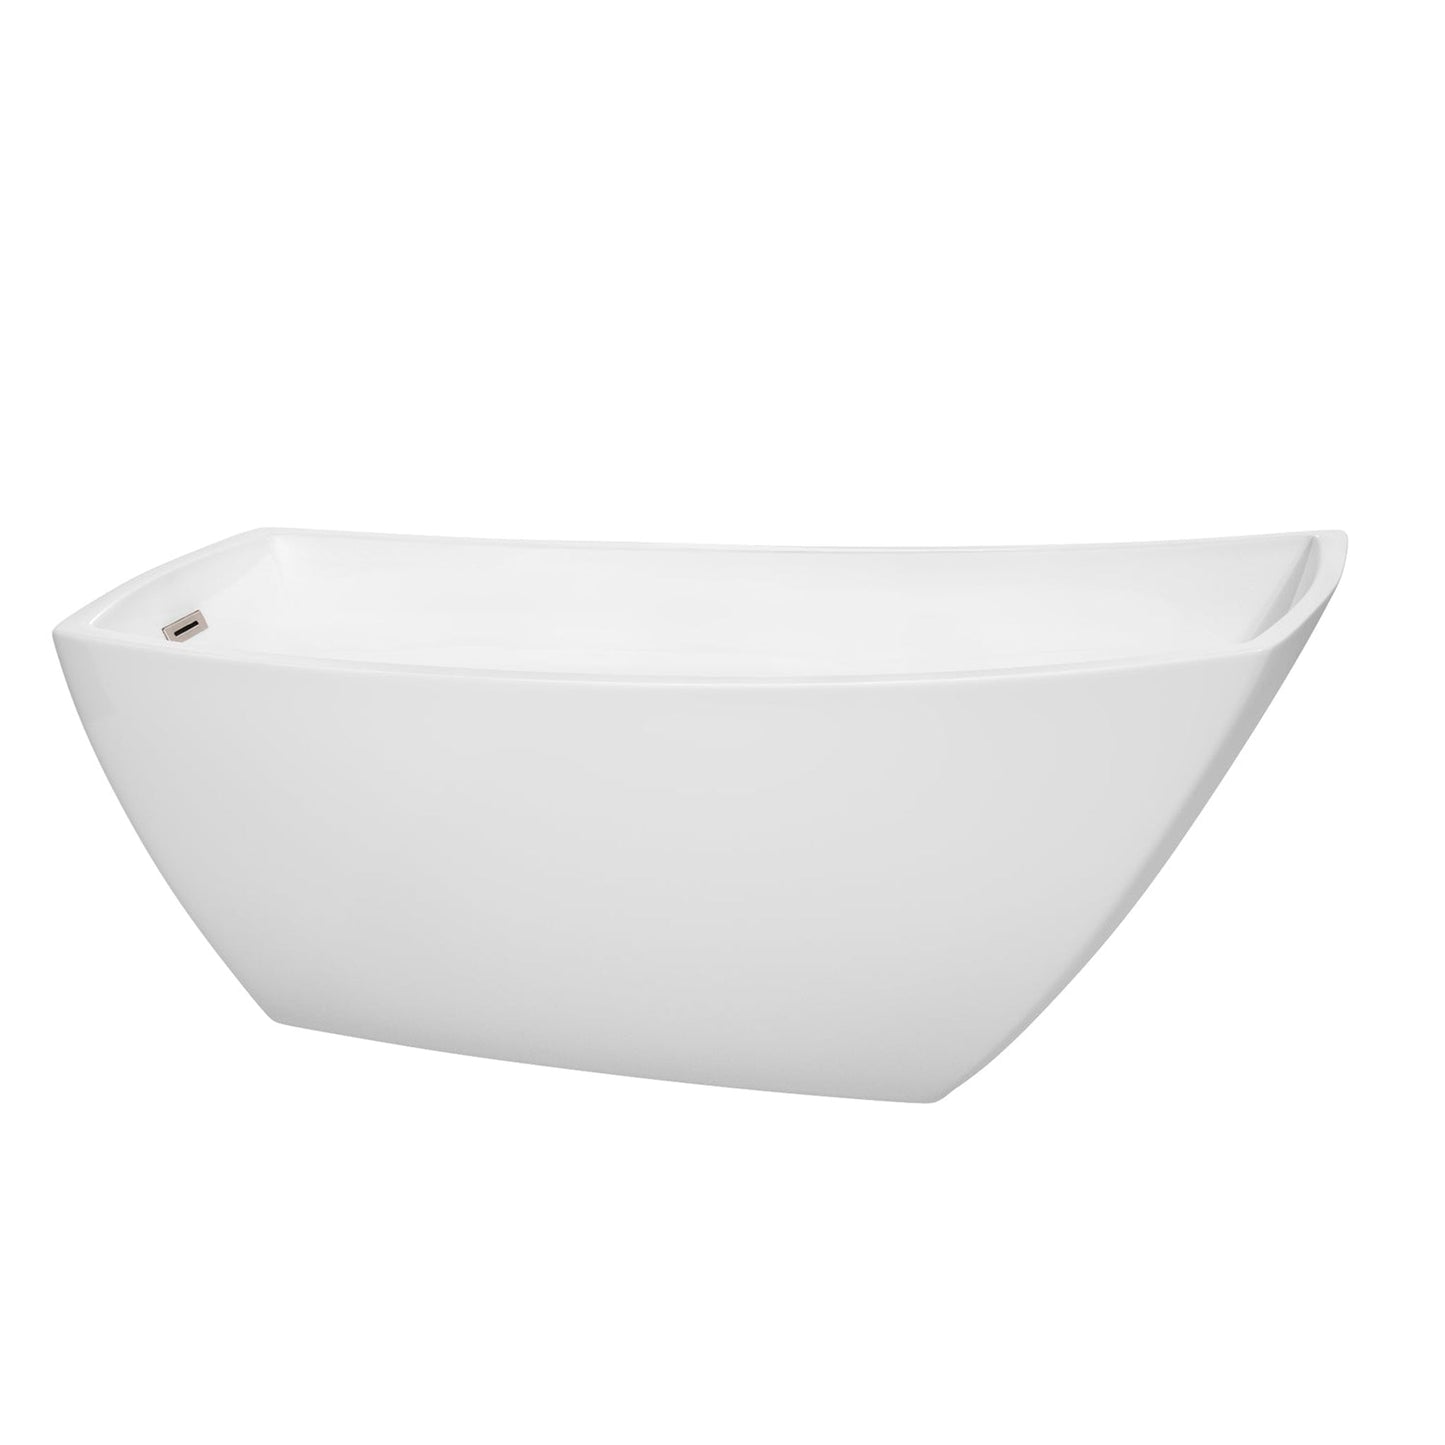 Wyndham Collection Antigua 67" Freestanding Bathtub in White With Brushed Nickel Drain and Overflow Trim